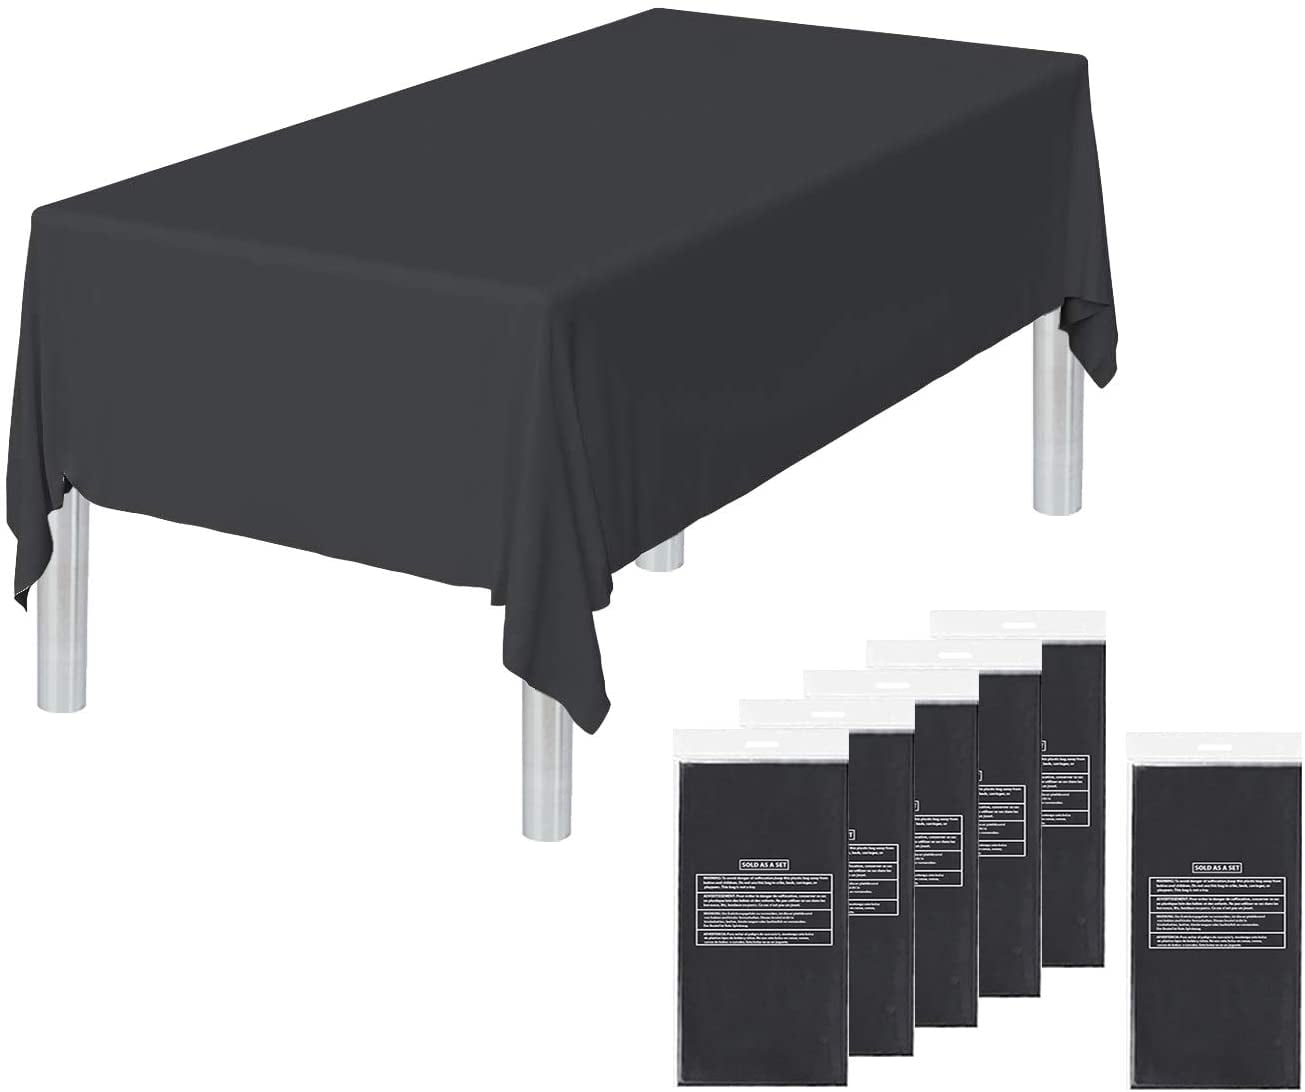 Waterproof Covers for Indoor or Outdoor Events & Parties Sonluma 6 Pack 108 X 54 Black Premium Disposable Plastic Tablecloth for 8ft Long Rectangle Tables 